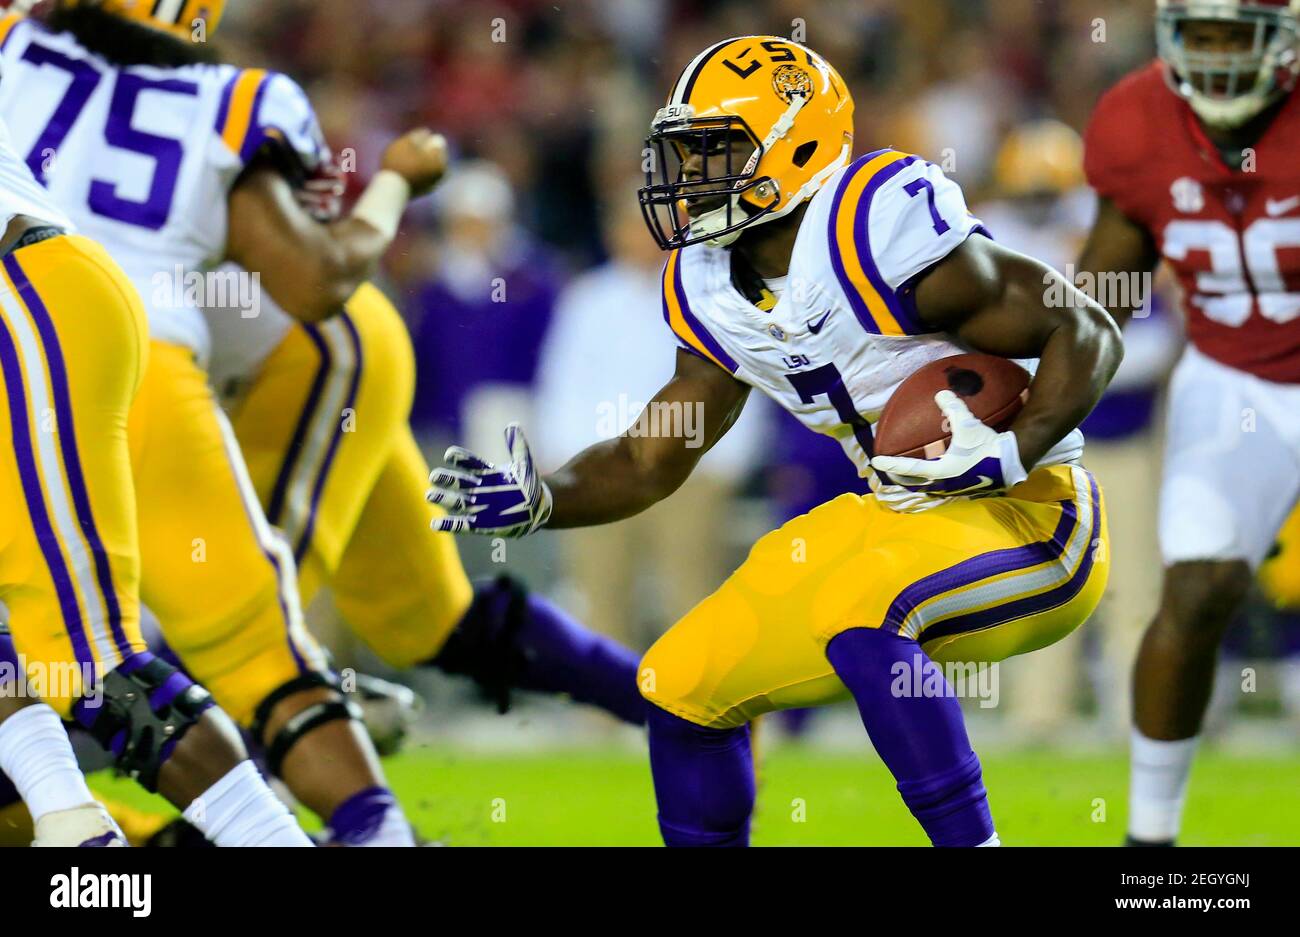 Nov 7, 2015; Tuscaloosa, AL, USA; LSU Tigers running back Leonard Fournette (7) runs the ball during the first quarter against the Alabama Crimson Tide at Bryant-Denny Stadium. Mandatory Credit: Marvin Gentry-USA TODAY Sports  / Reuters  Picture Supplied by Action Images   (TAGS: Sport American Football NCAA) *** Local Caption *** 2015-11-08T021706Z 1215698228 NOCID RTRMADP 3 NCAA-FOOTBALL-LOUISIANA-STATE-AT-ALABAMA.JPG Stock Photo